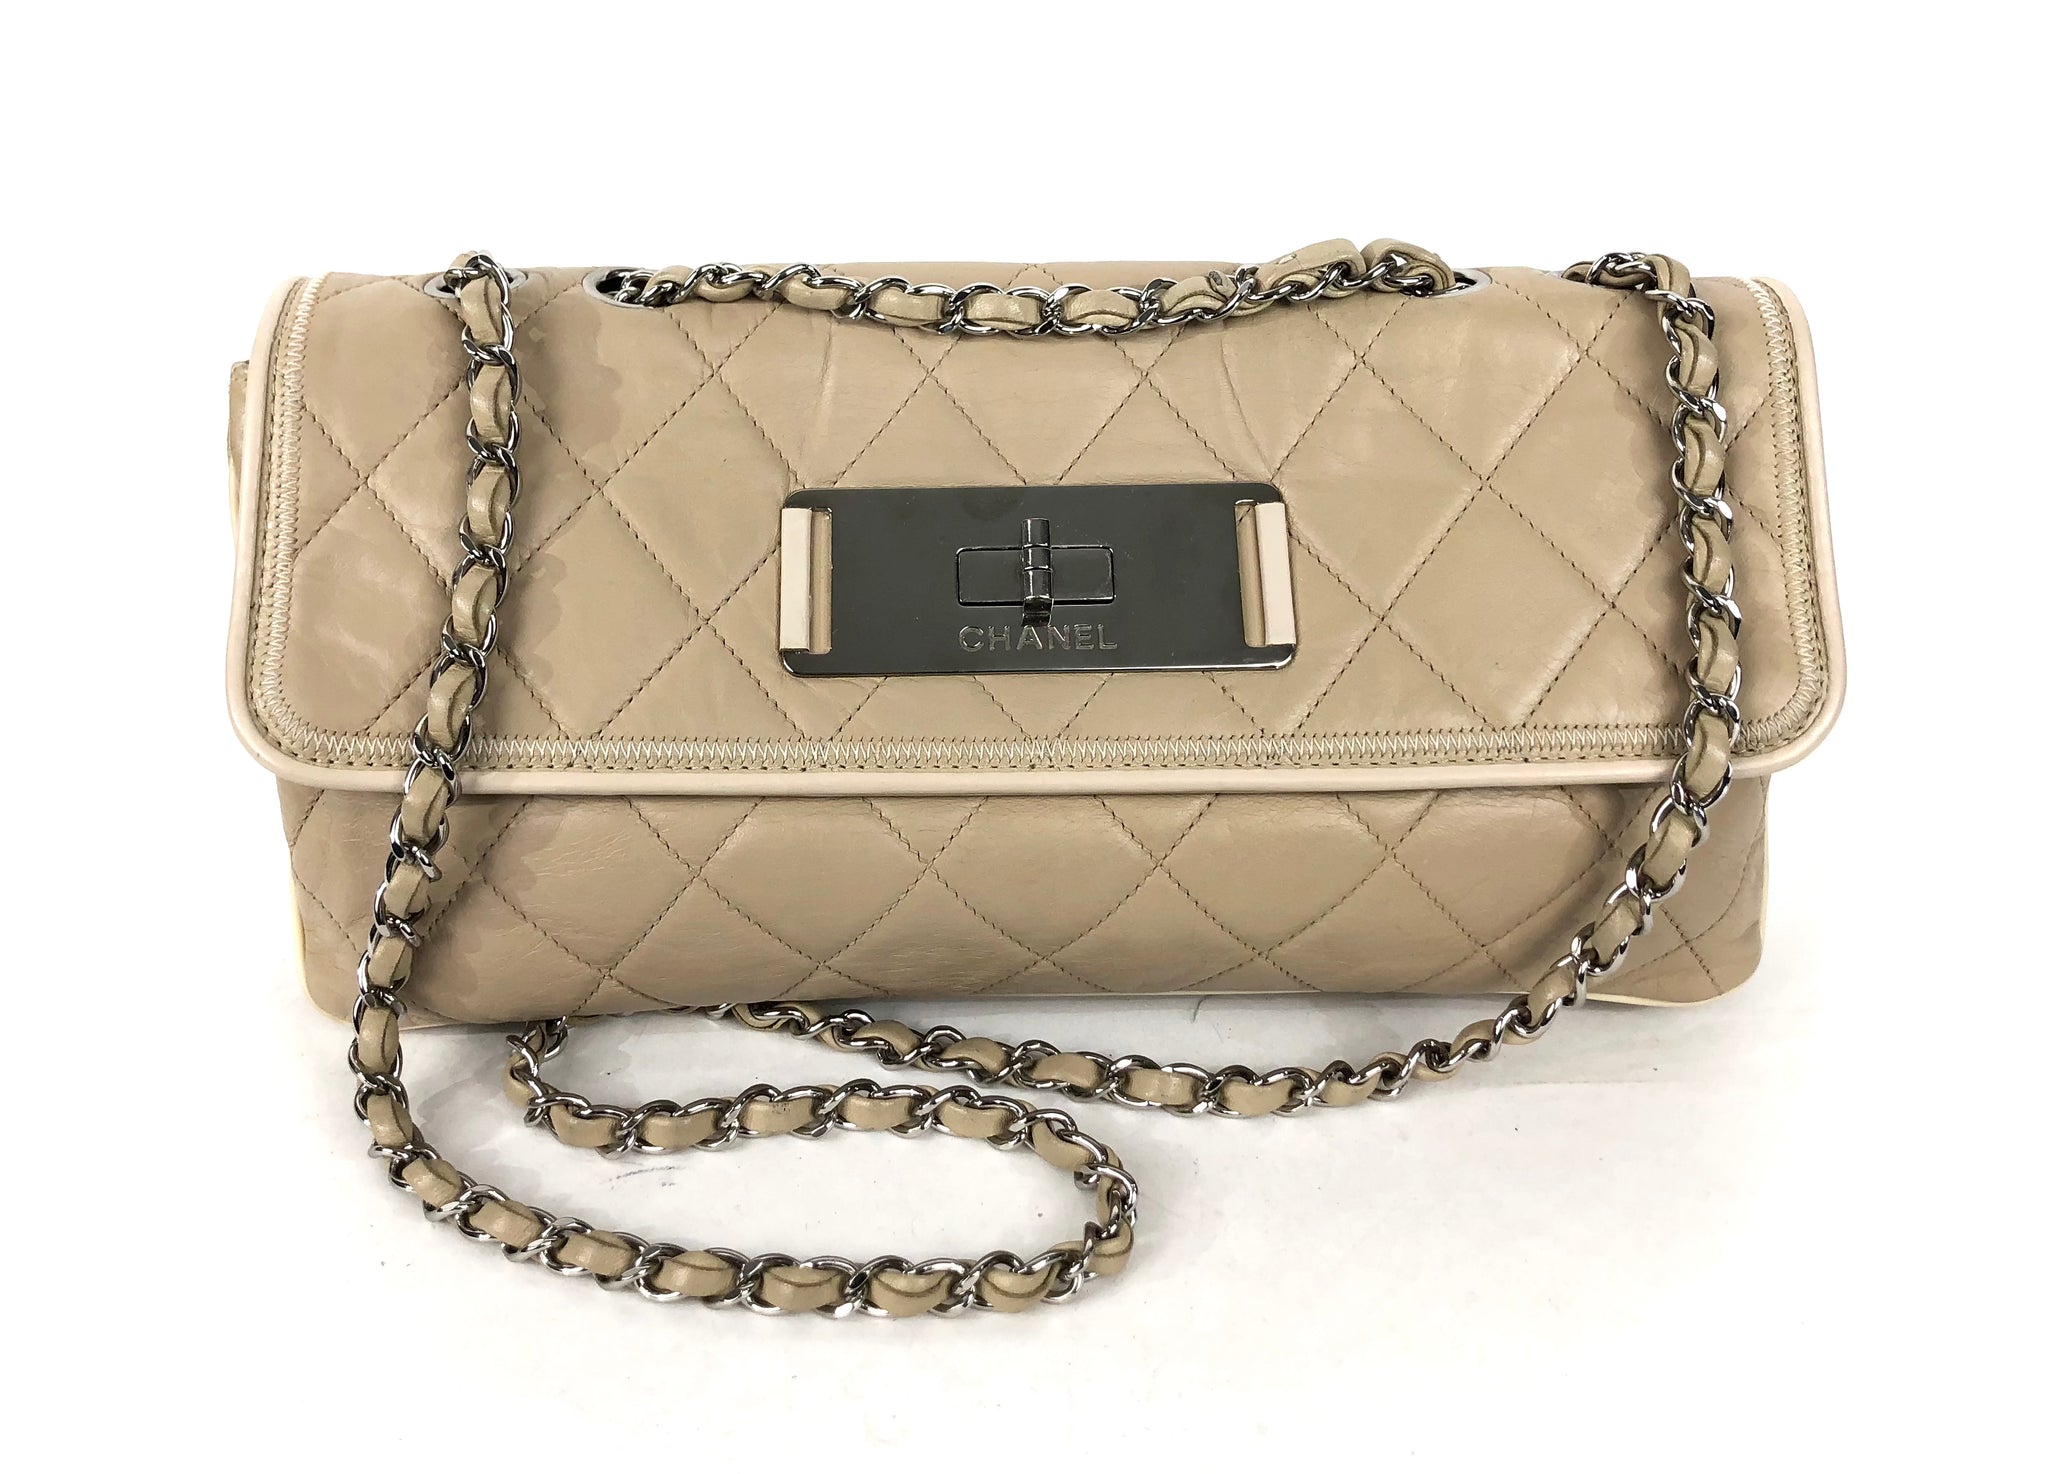 CHANEL Satin Exterior Bags & Handbags for Women, Authenticity Guaranteed